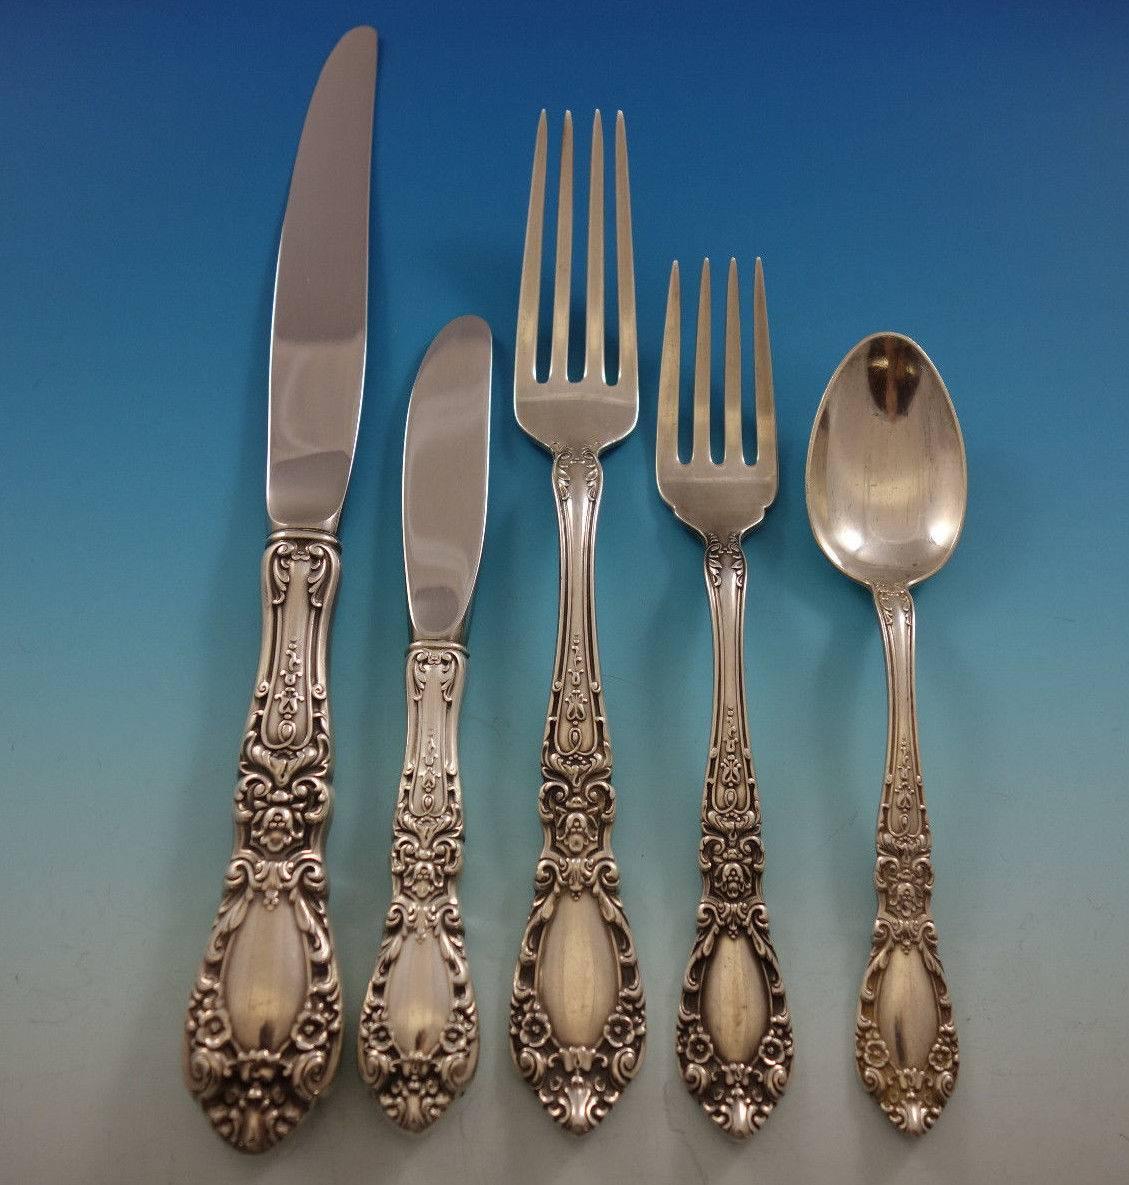 Prince Eugene by Alvin Sterling Silver Flatware Set for 8 Service 40 Pcs Dinner In Excellent Condition For Sale In Big Bend, WI